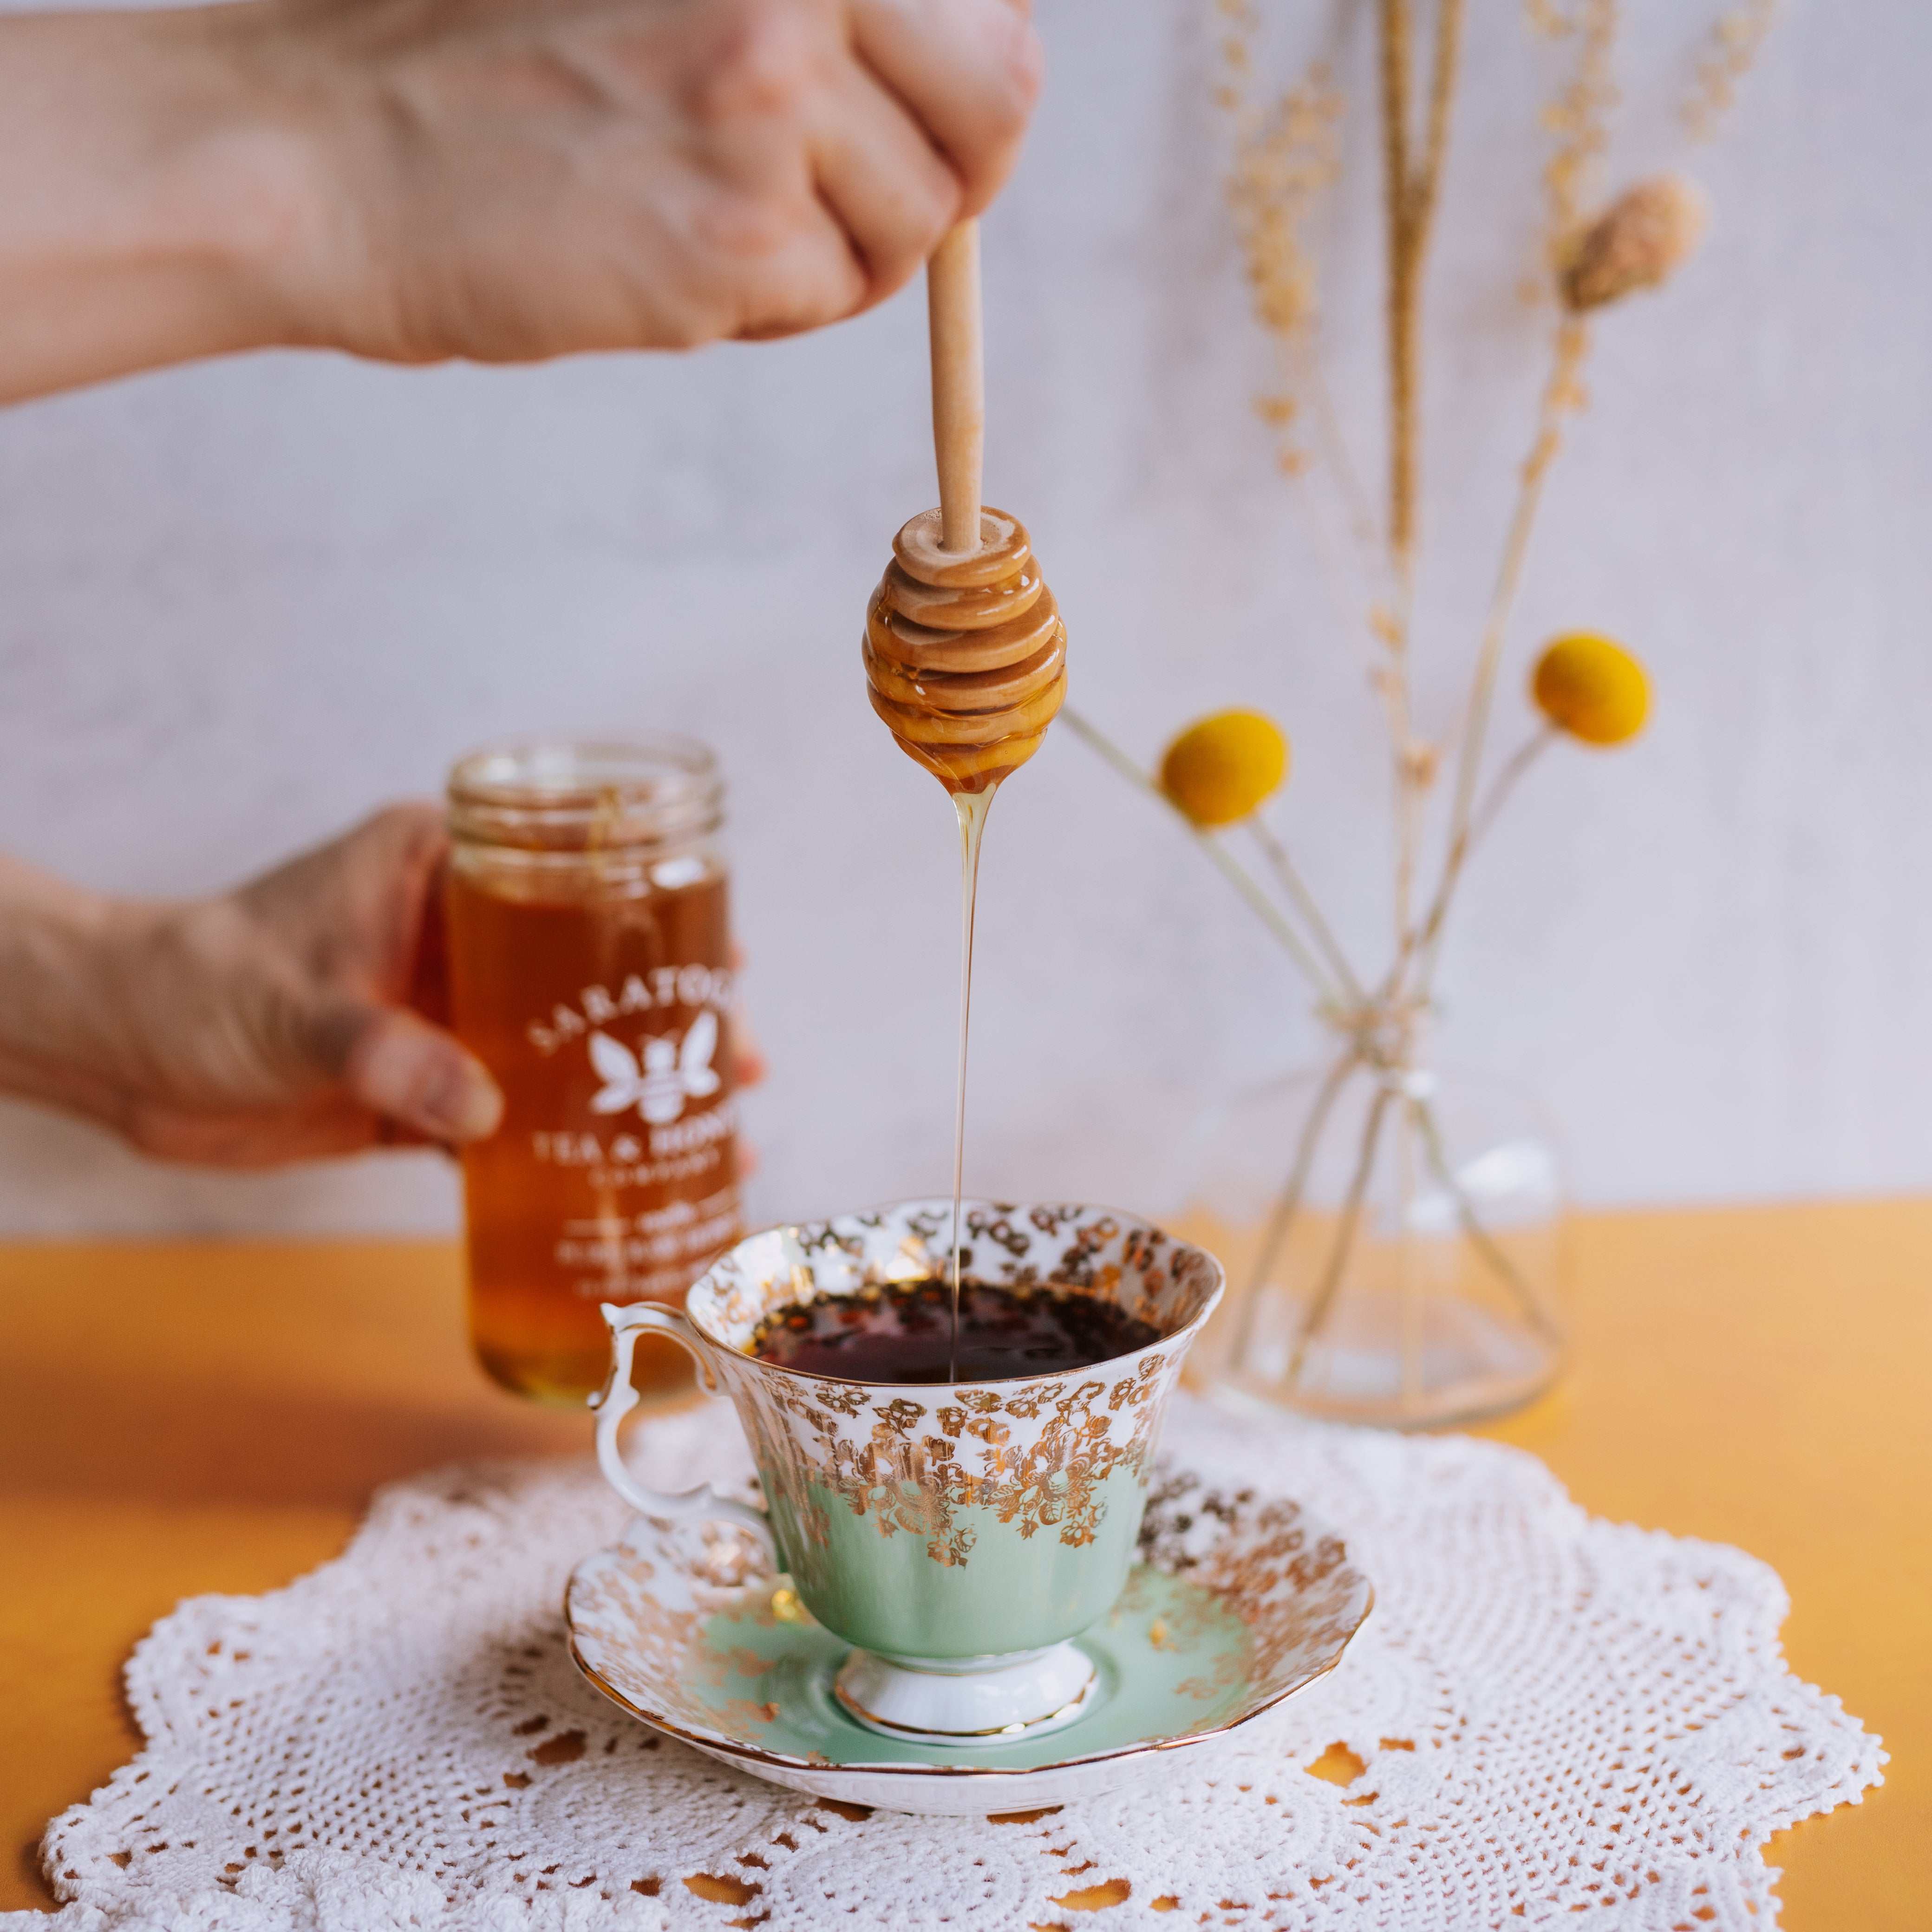 hand drizzling honey into vintage teacup from above with a wooden honey dipper and Saratoga Tea & Honey Co. honey jar in background